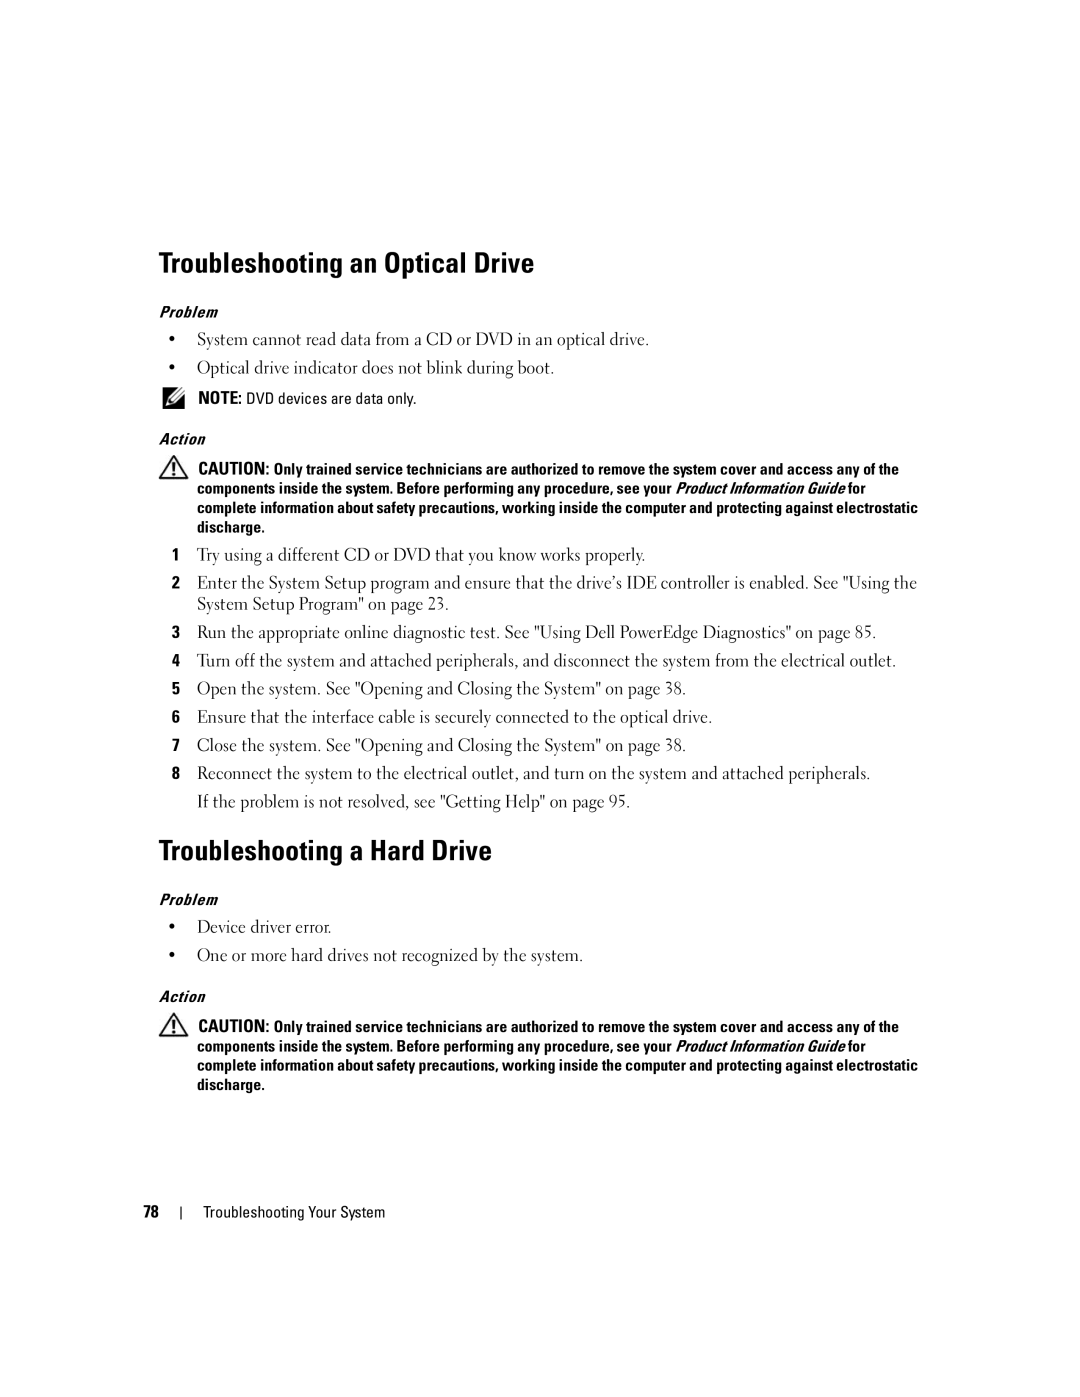 Dell SC1435 owner manual Troubleshooting an Optical Drive, Troubleshooting a Hard Drive, Action Troubleshooting Your System 